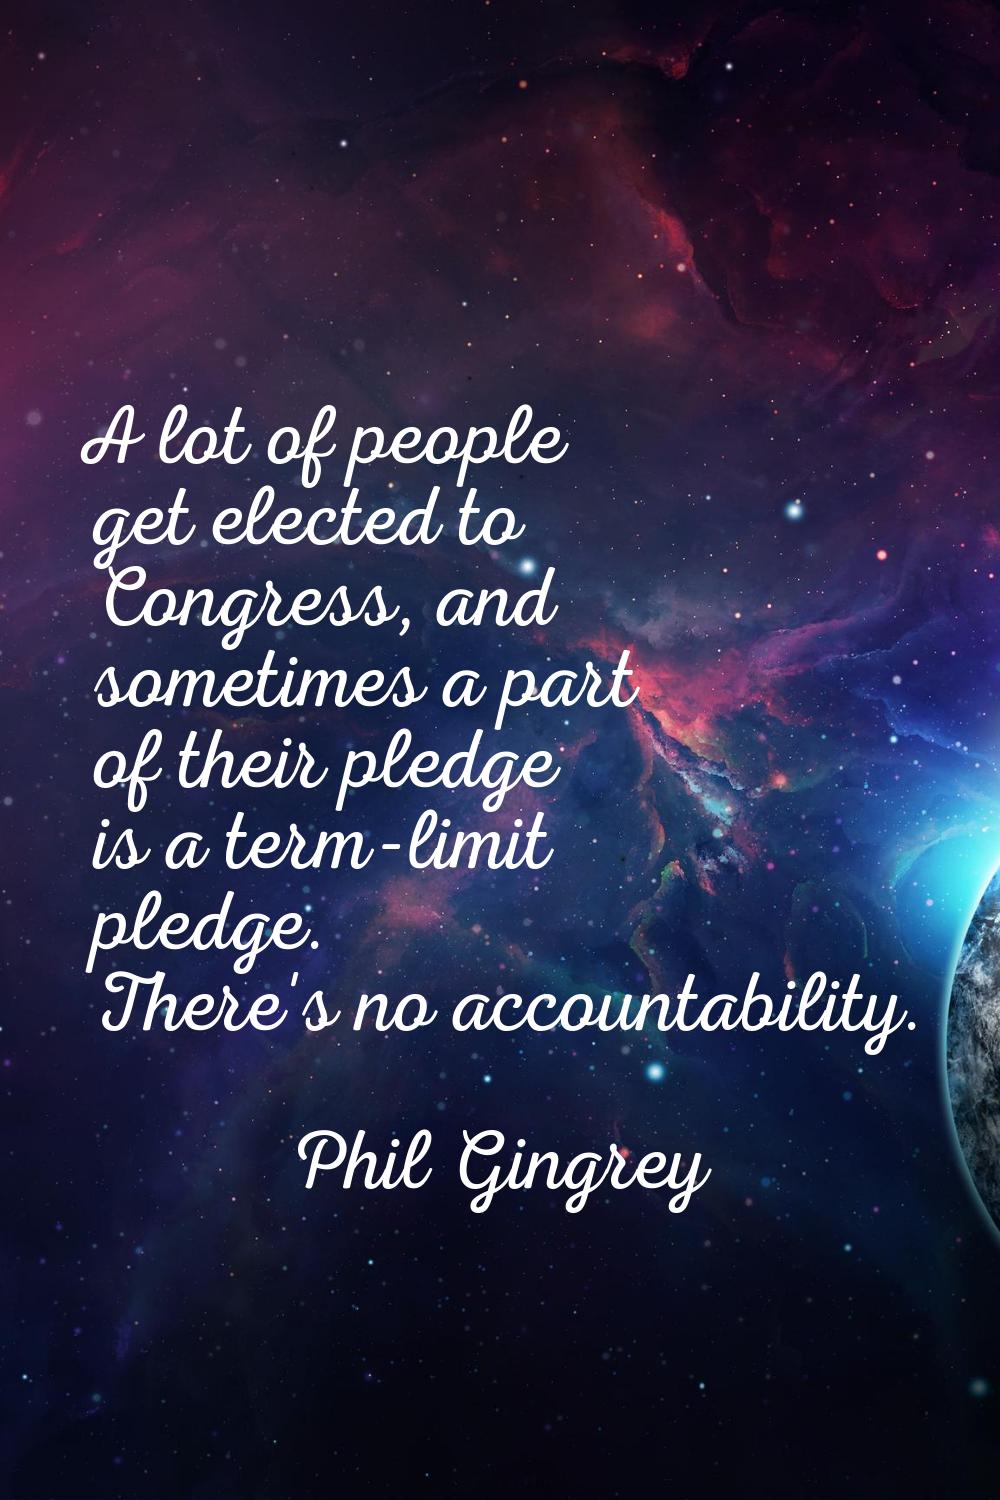 A lot of people get elected to Congress, and sometimes a part of their pledge is a term-limit pledg